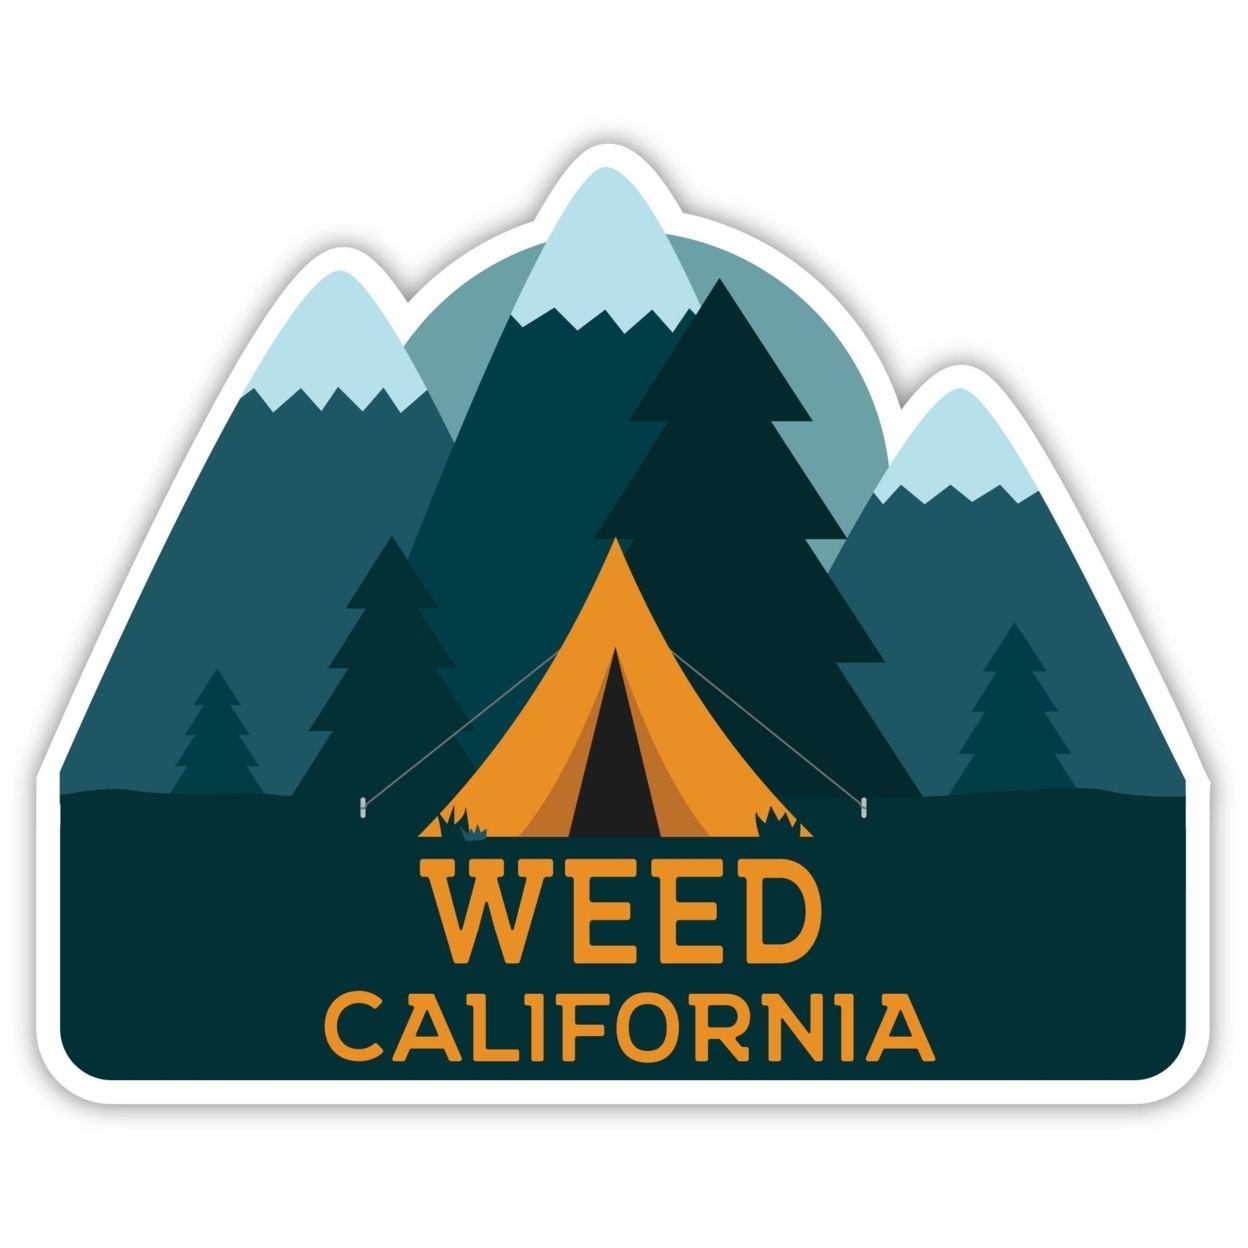 Weed California Souvenir Decorative Stickers (Choose Theme And Size) - Single Unit, 2-Inch, Camp Life